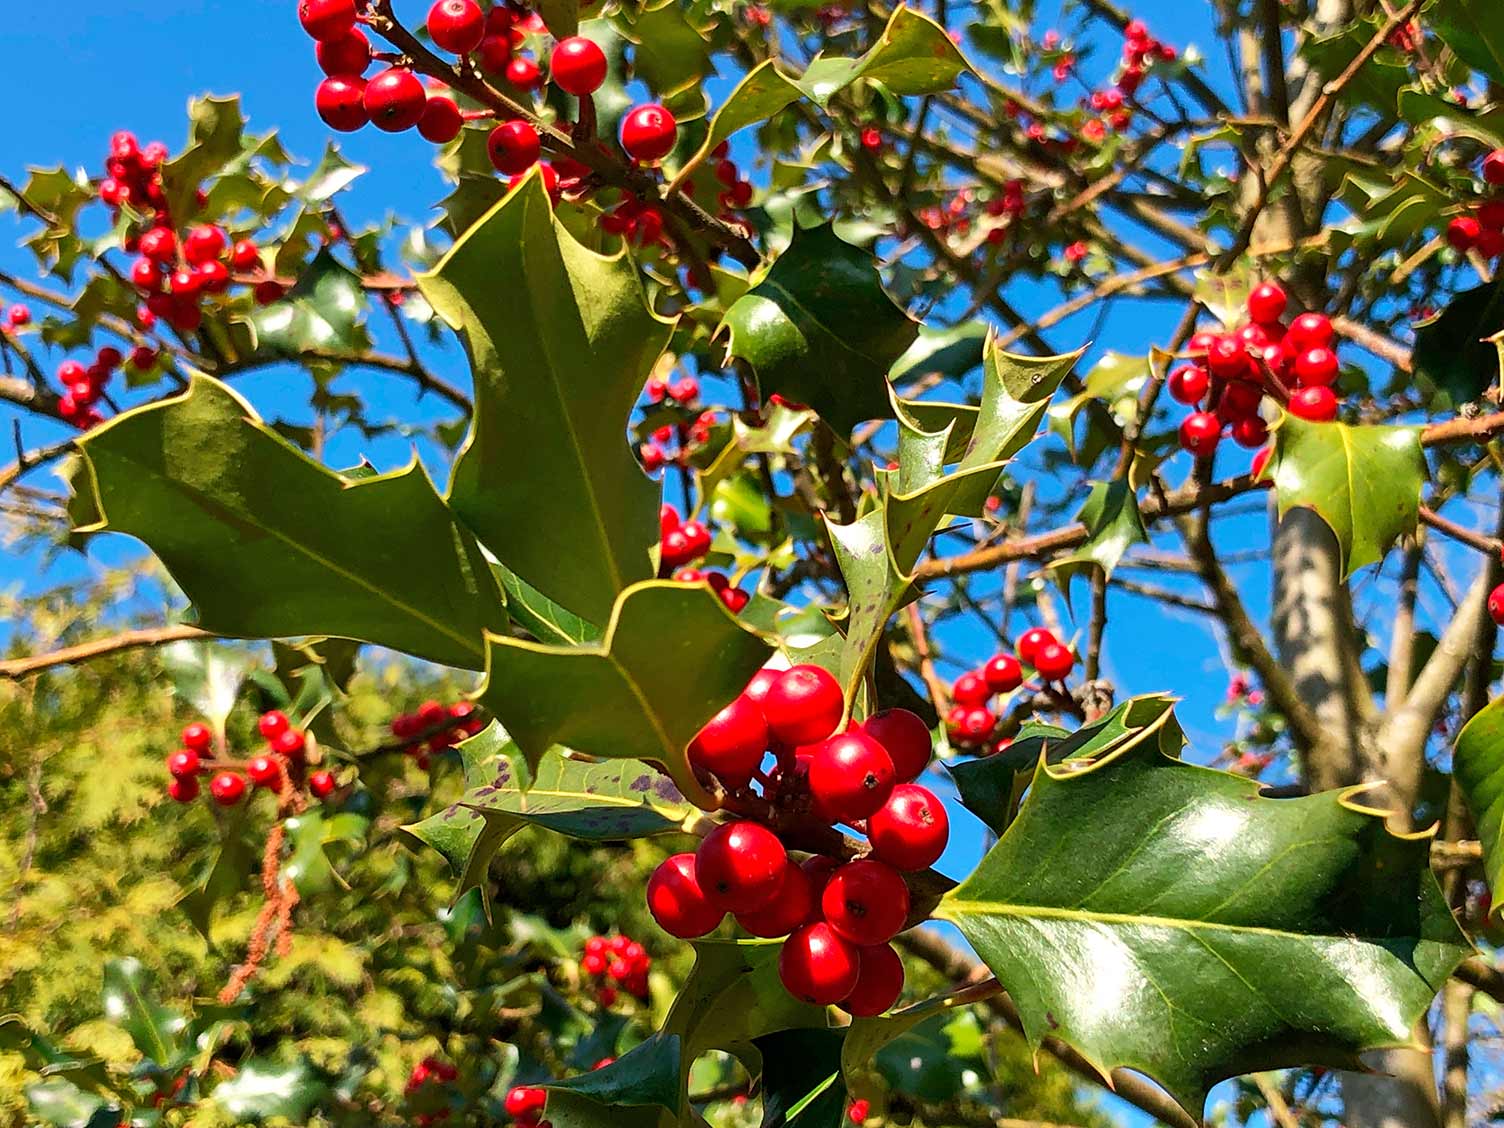 Holly growing, with berries